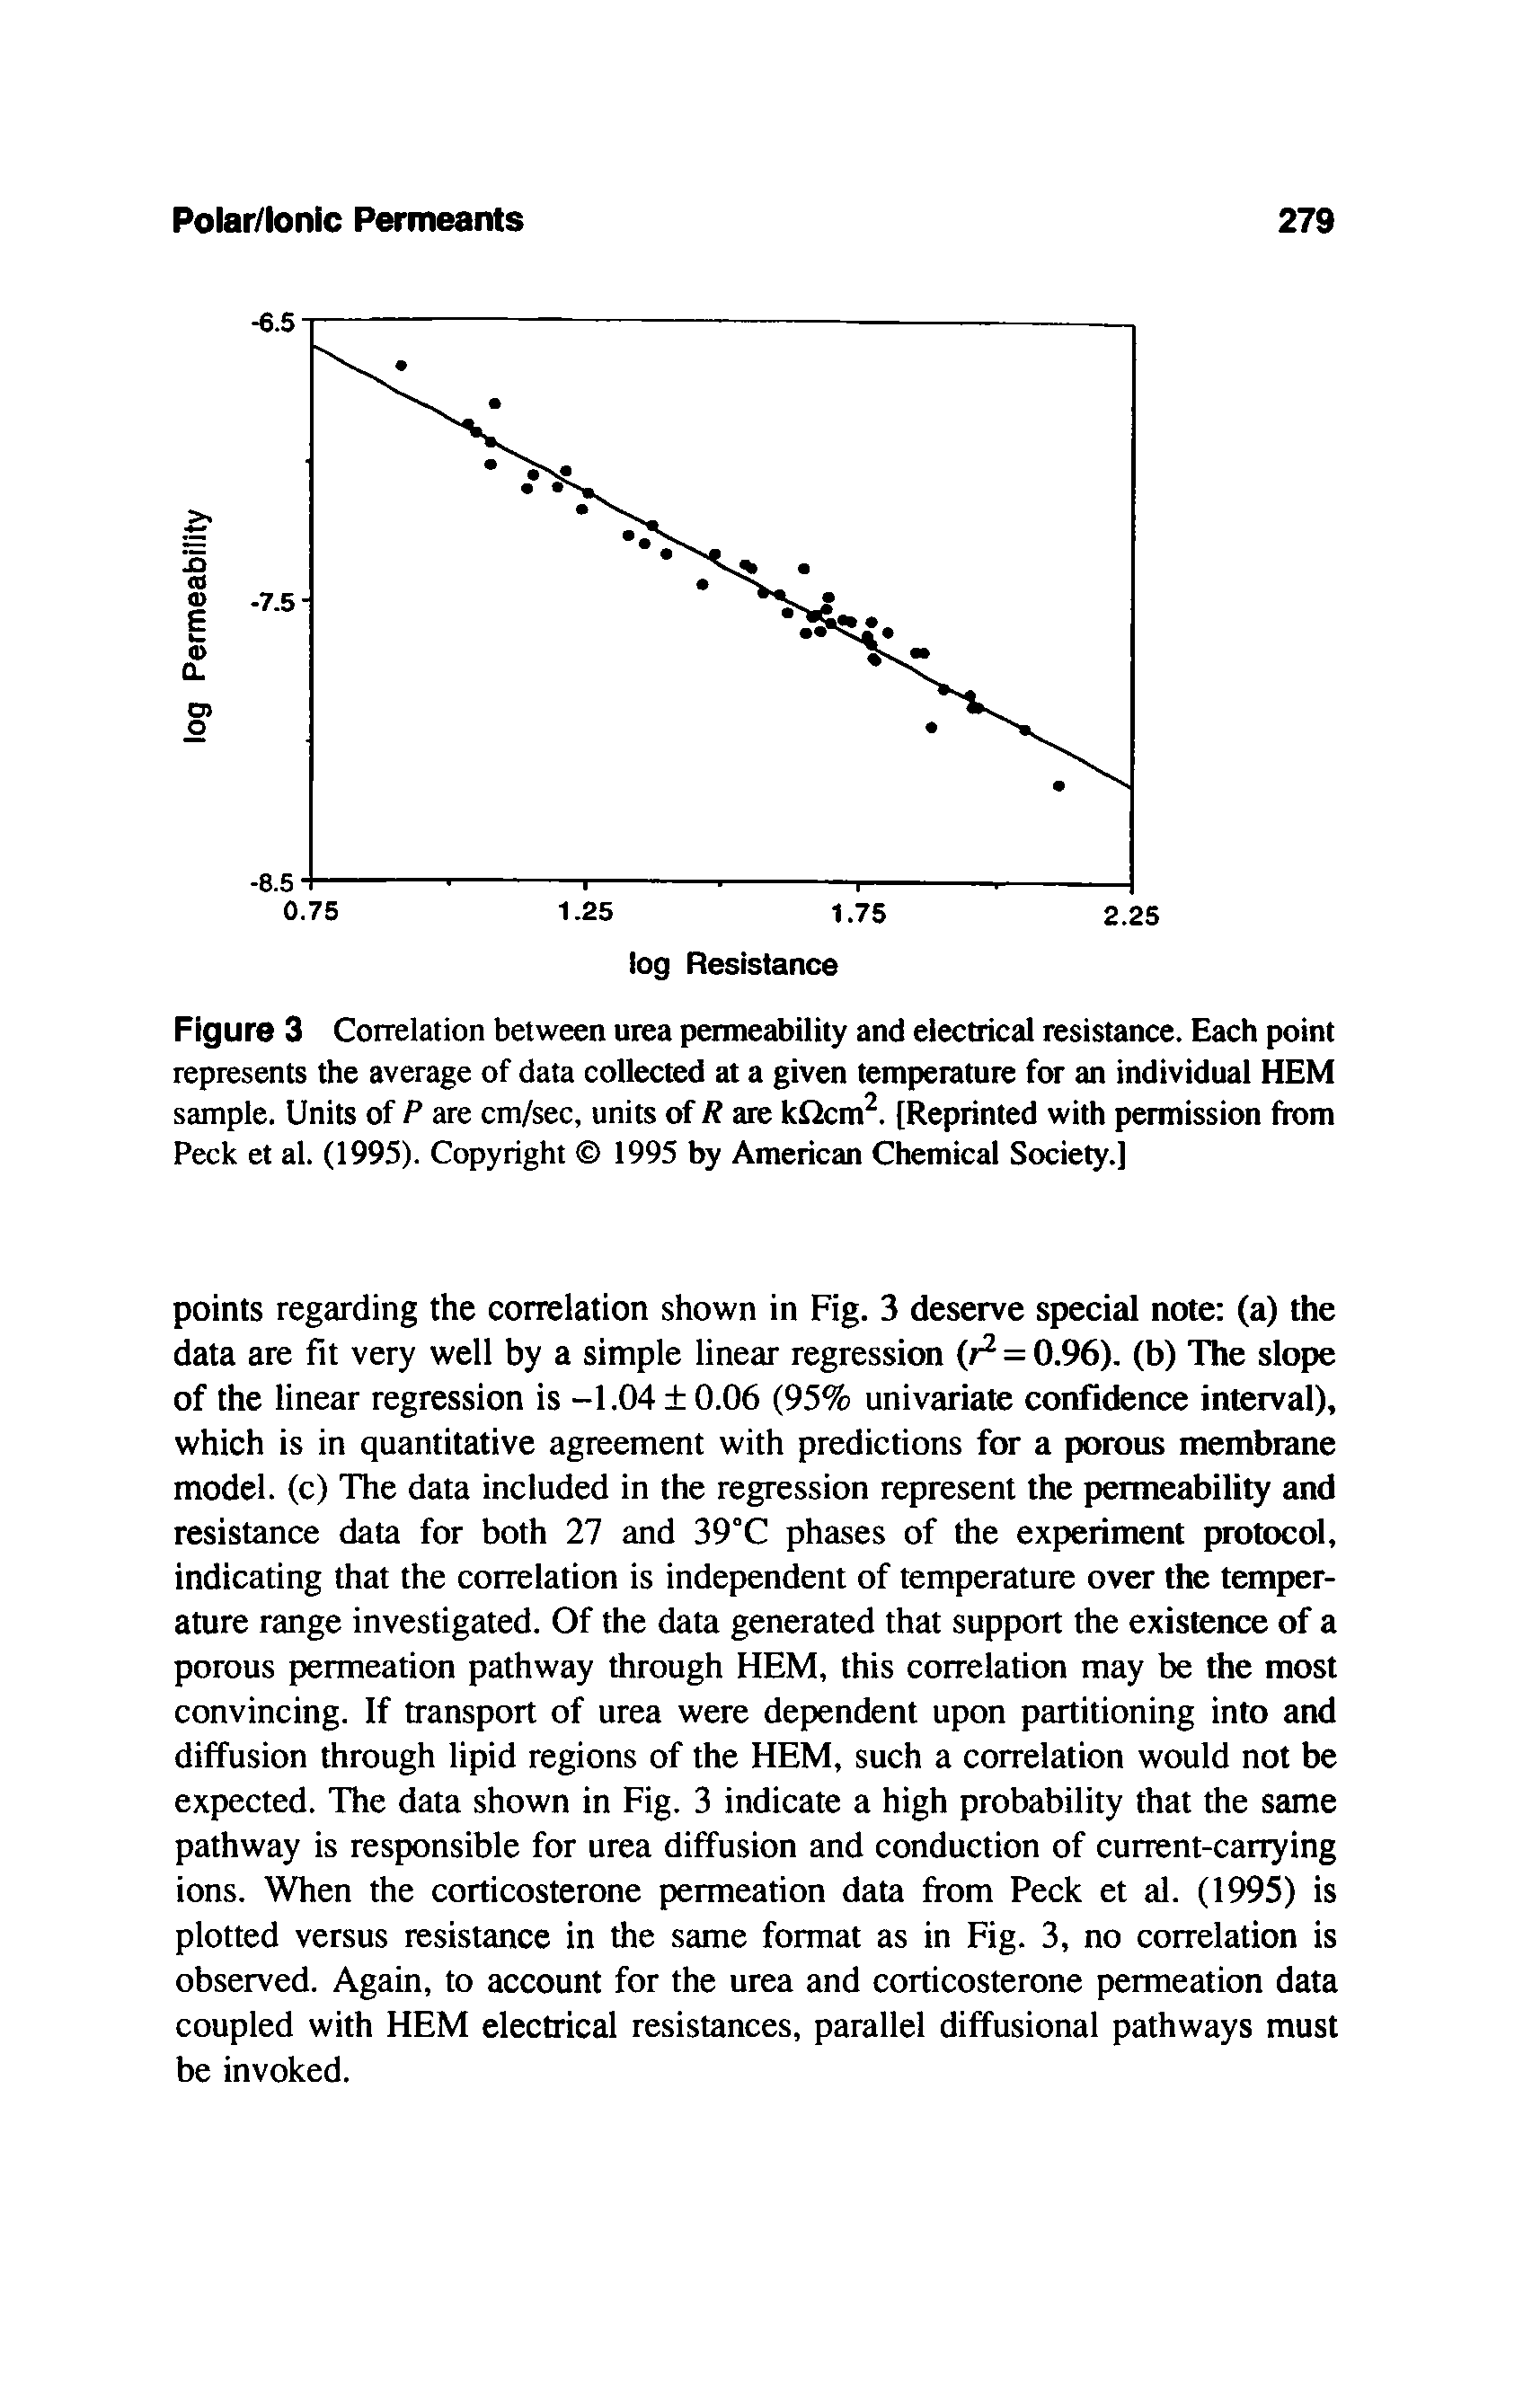 Figure 3 Correlation between urea permeability and electrical resistance. Each point represents the average of data collected at a given temperature for an individual HEM sample. Units of P are cm/sec, units of /f are k icm. [Reprinted with permission from Peck et al. (1995). Copyright 1995 by American Chemical Society.]...